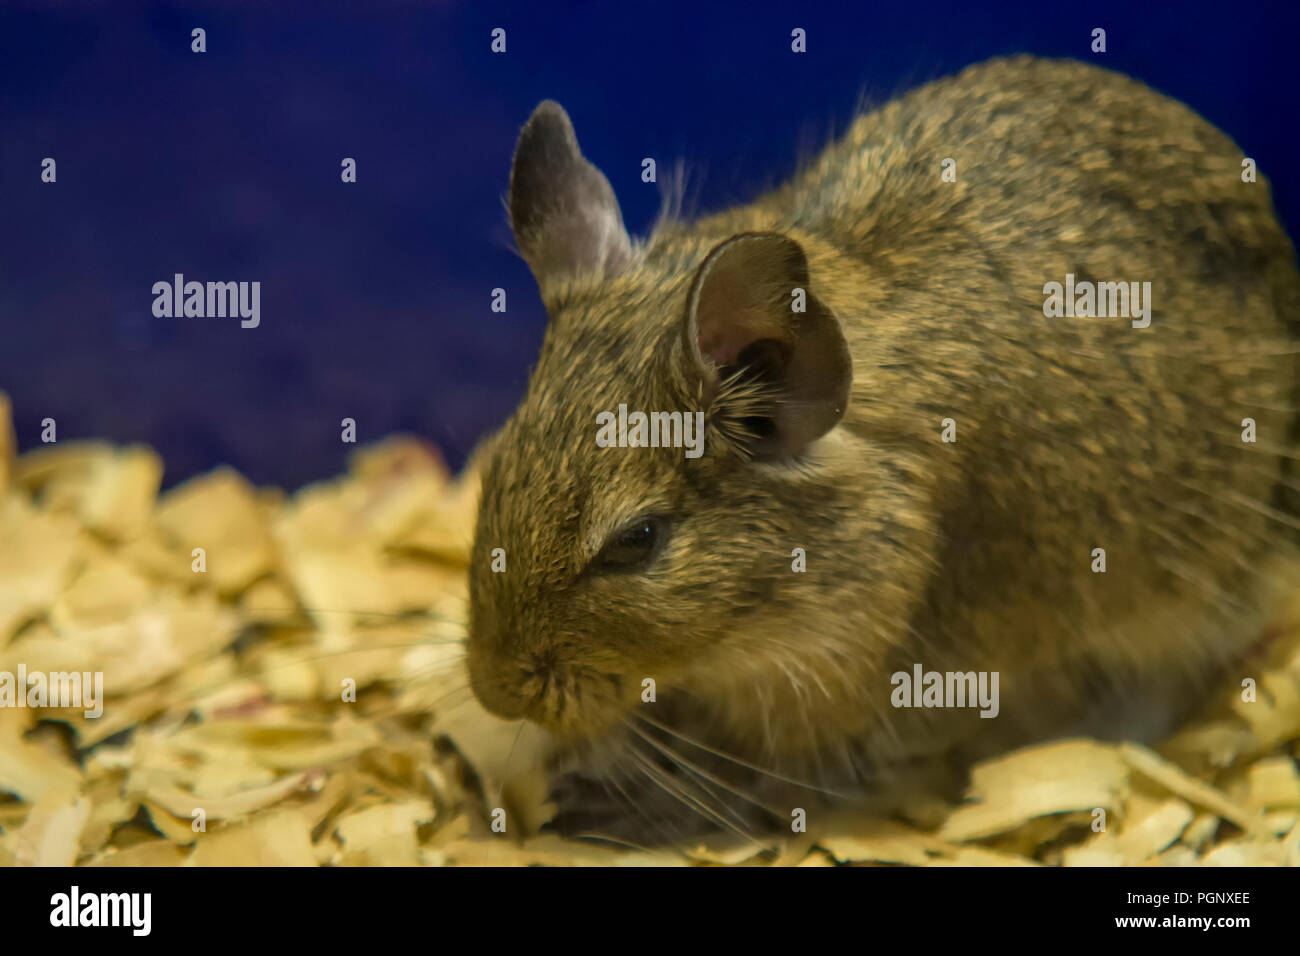 Degu close up, shallow dof.The common degu - Octodon degus - is a small caviomorph rodent endemic to the Chilean matorral ecoregion of central Chile. Stock Photo